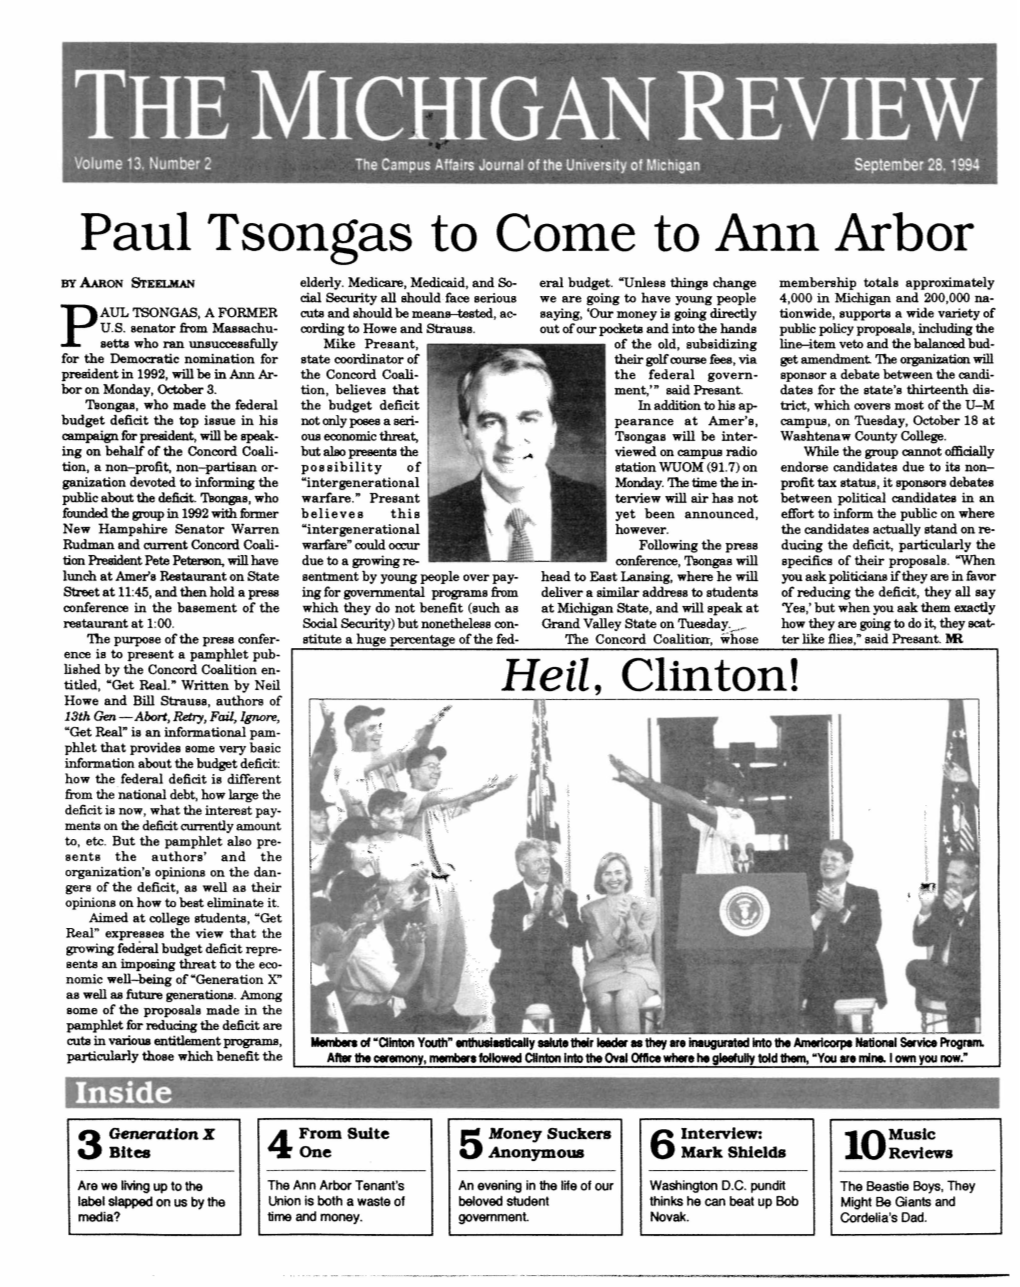 Paul Tsongas to Come to Ann Arbor